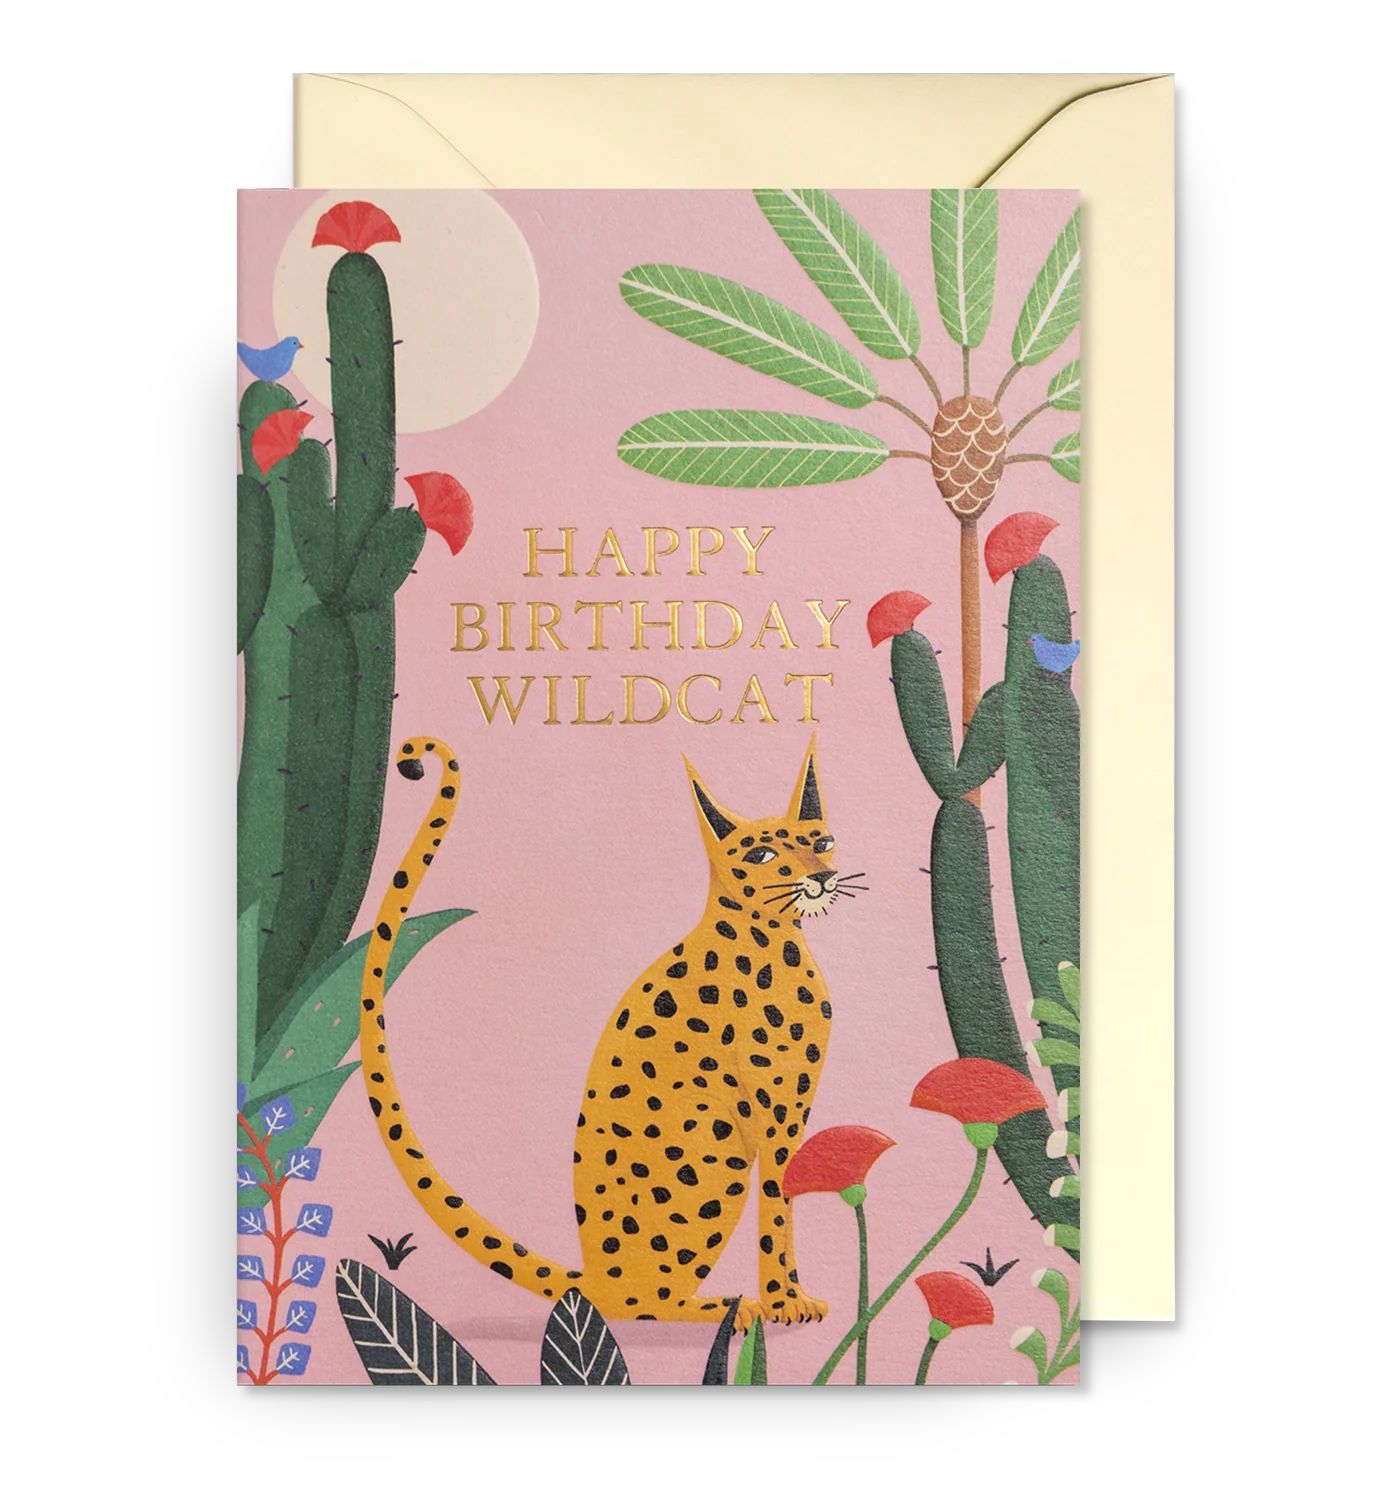 Happy Birthday Wildcat Jungle Leopard Birthday Card by Carrie May